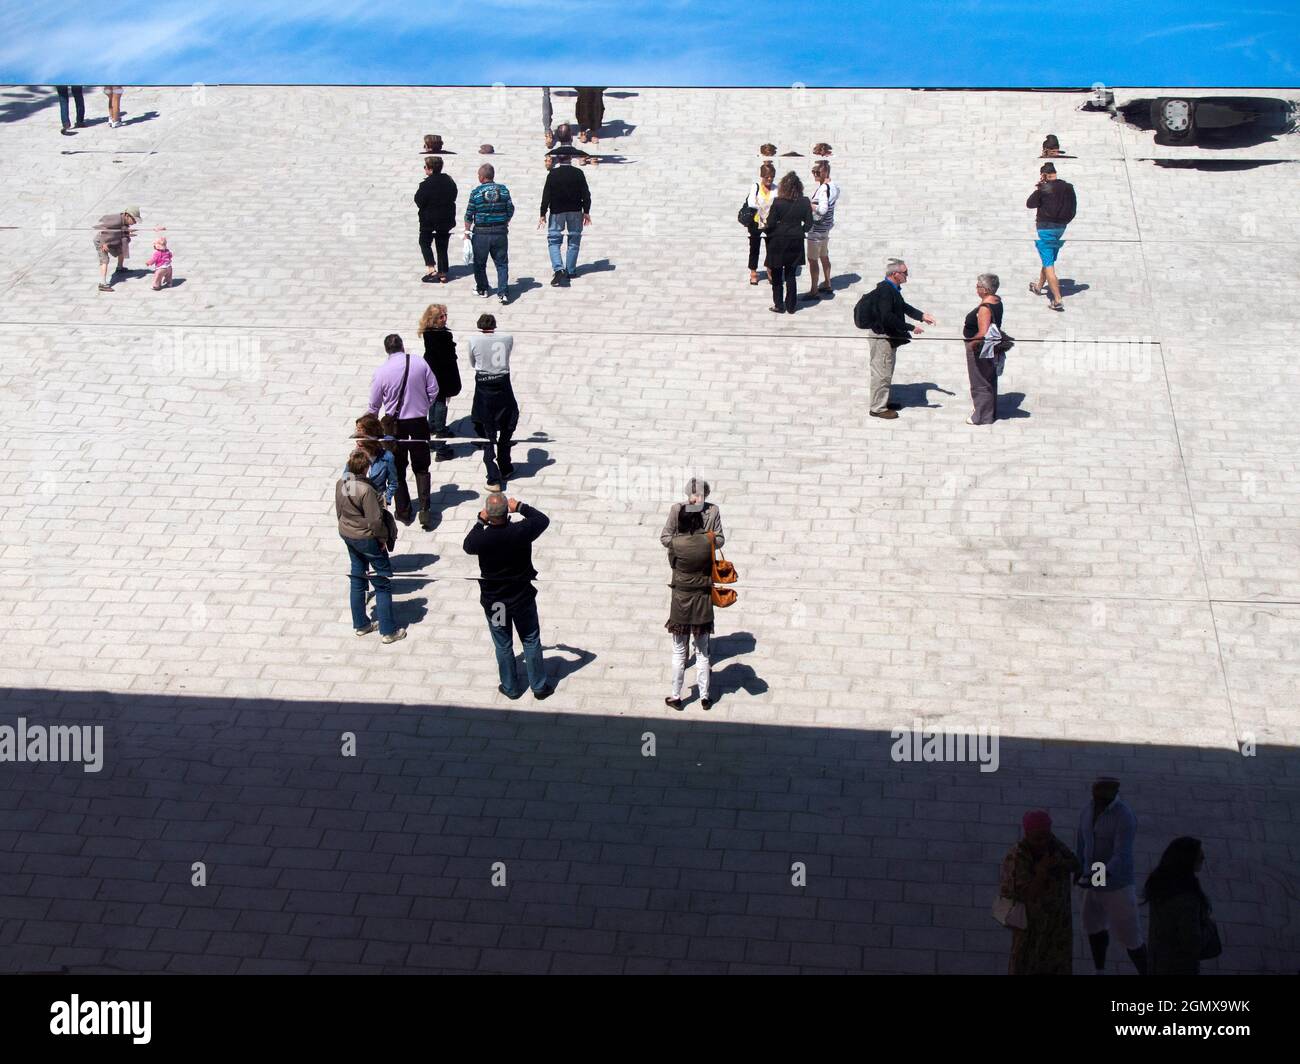 Marseilles, France - 20 June 2013; Lots of people in view, but upside down.The Ombriere in Marseilles Old Port is a blade of reflective stainless stee Stock Photo